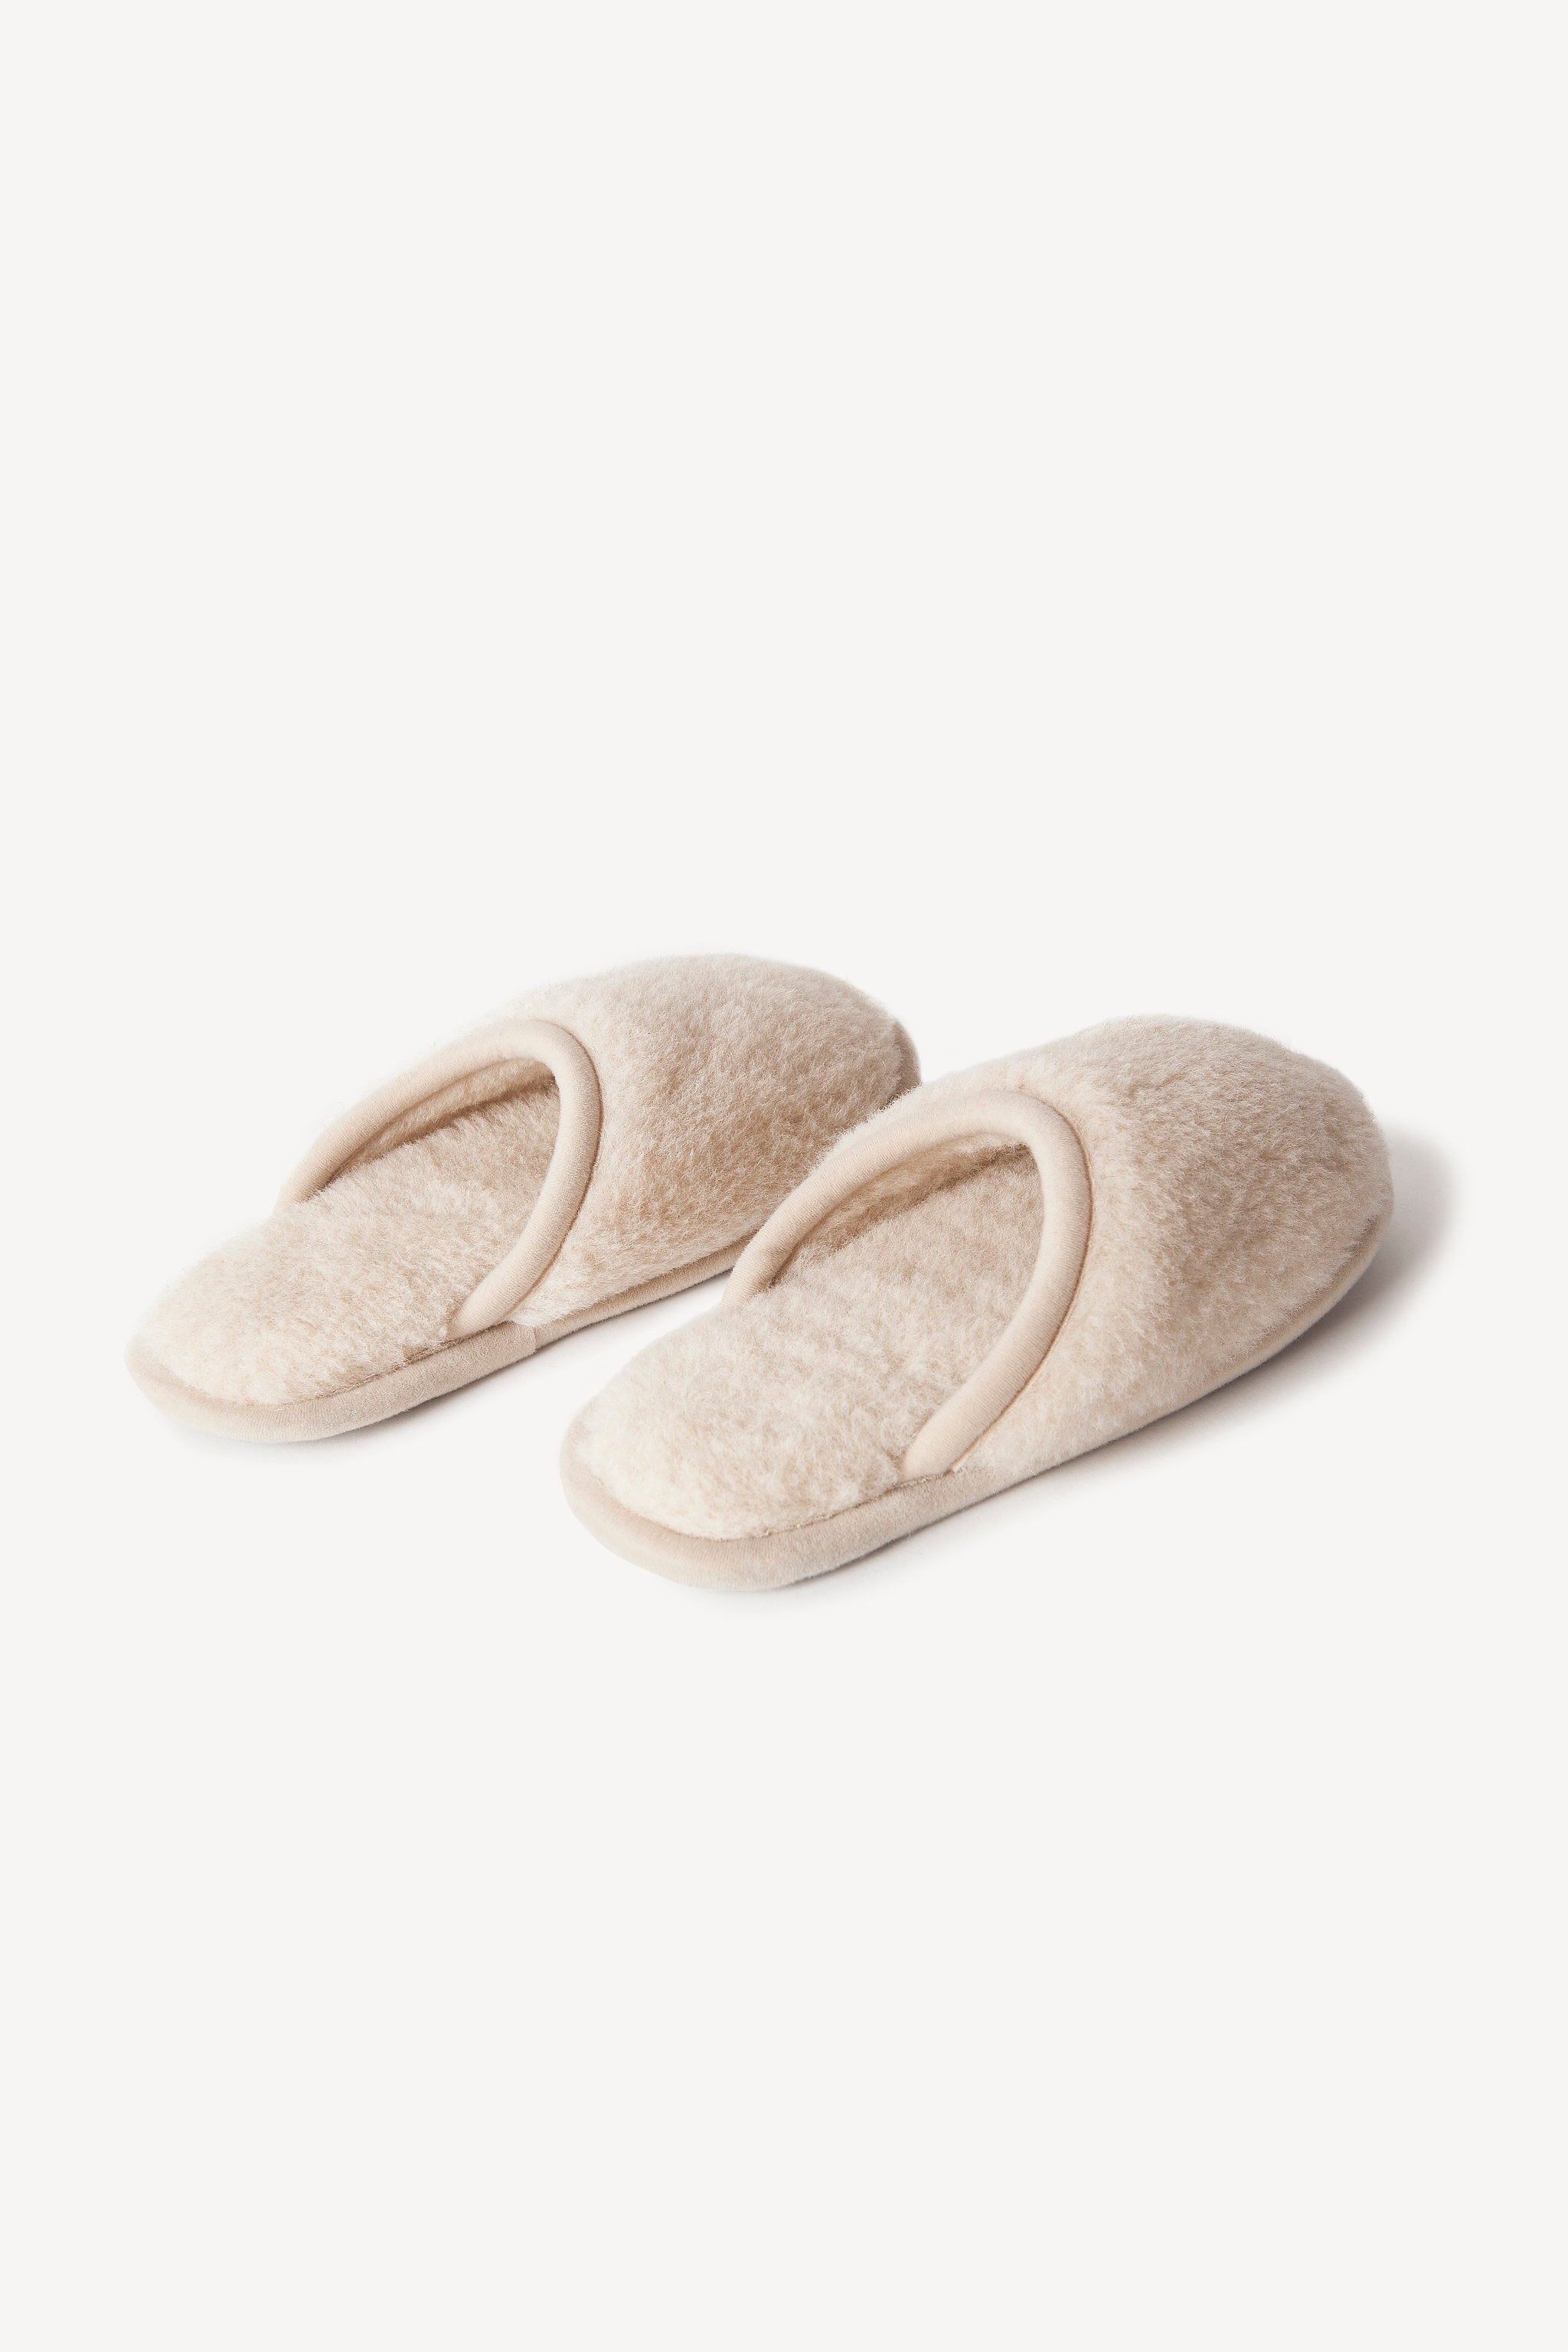 Hygge House Slippers - Natural - Hygge Life